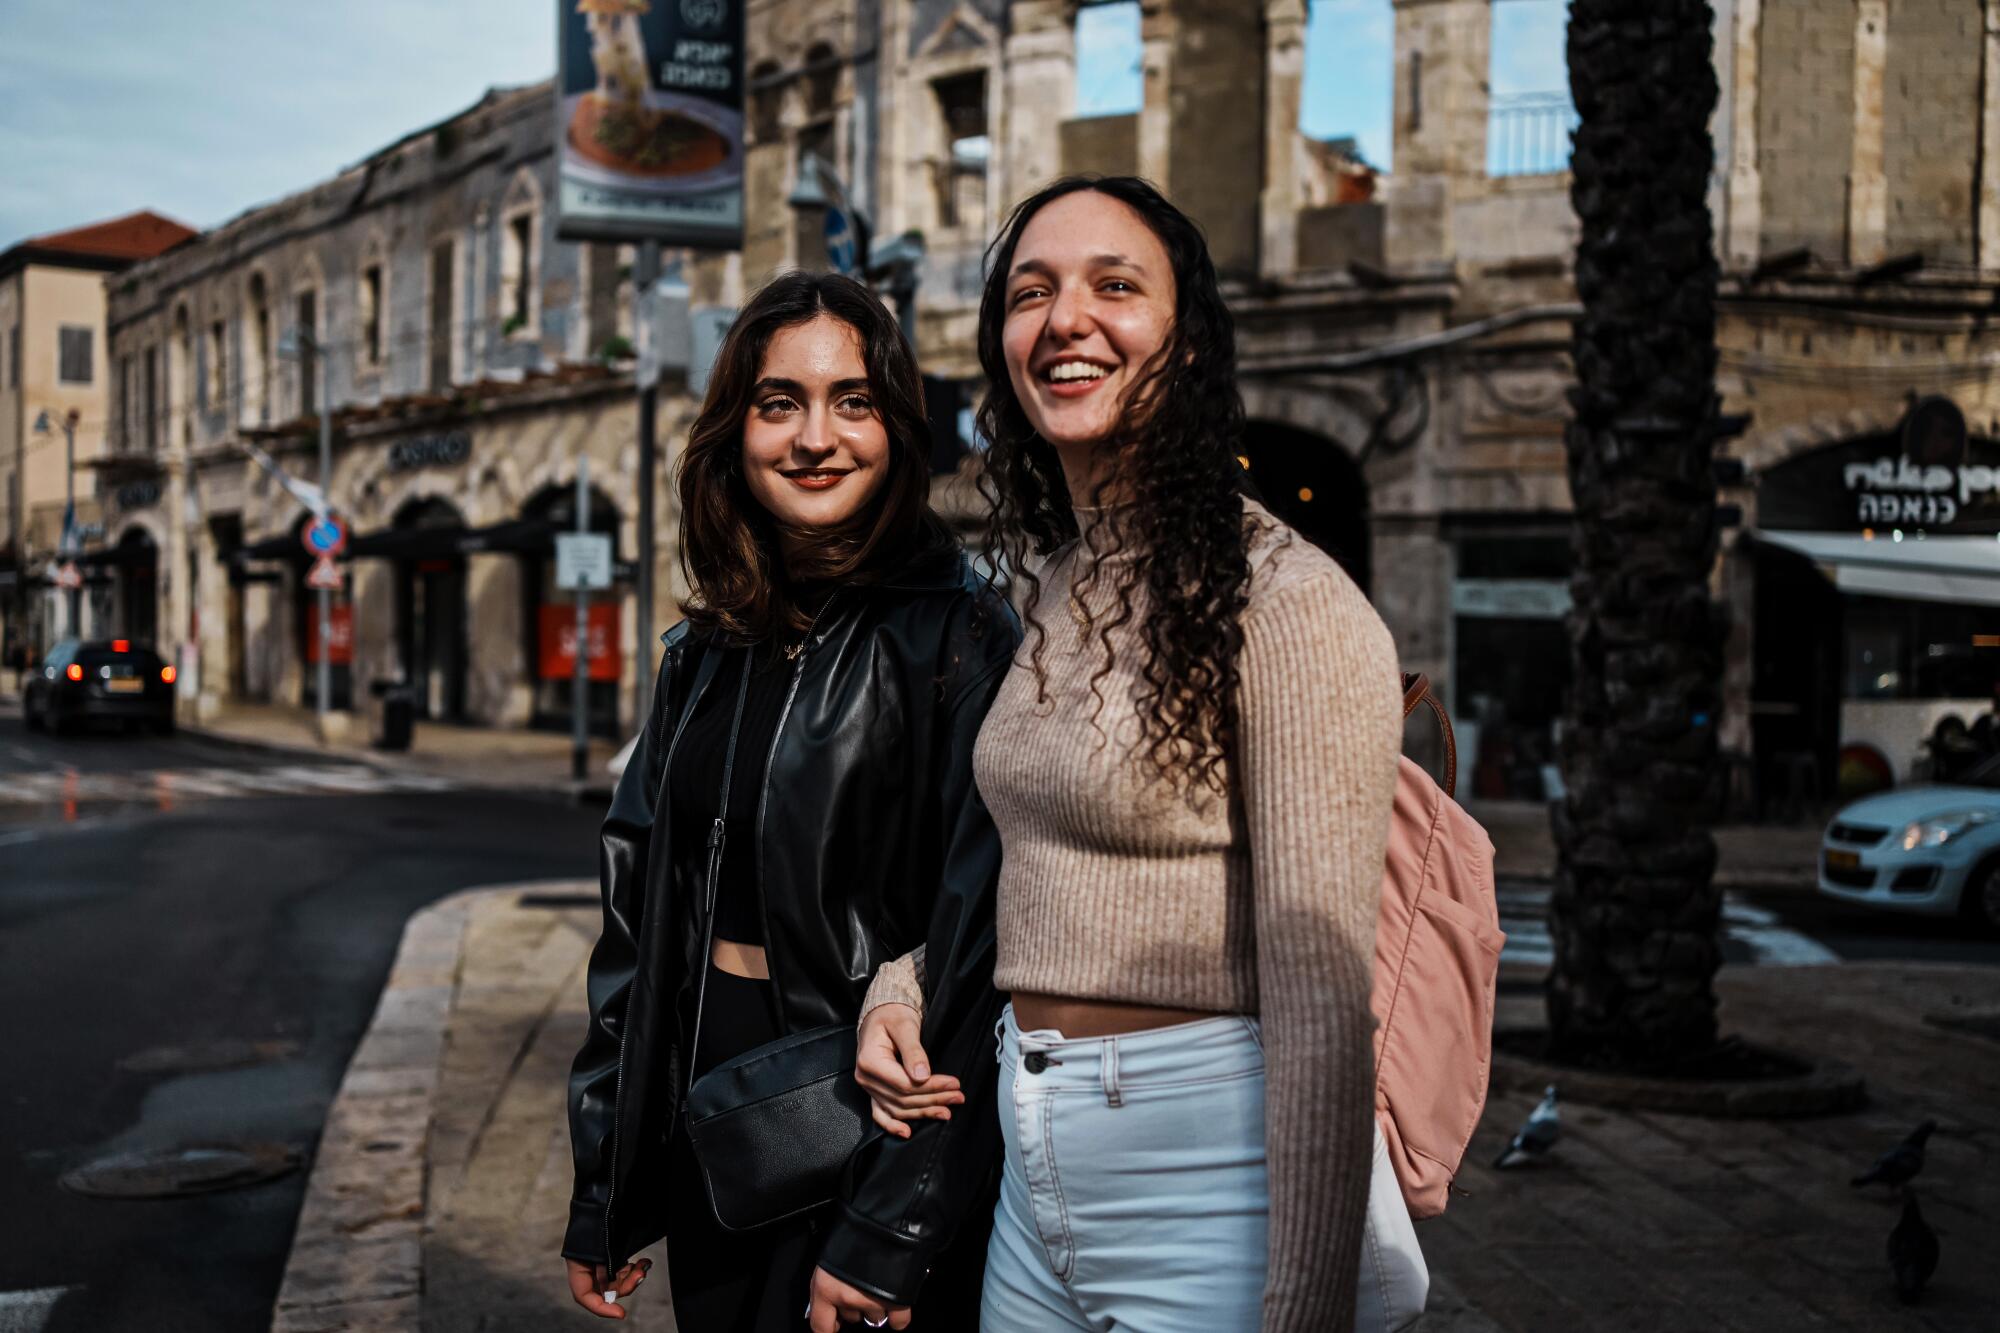 Two teen girls stand close together smiling on a street 